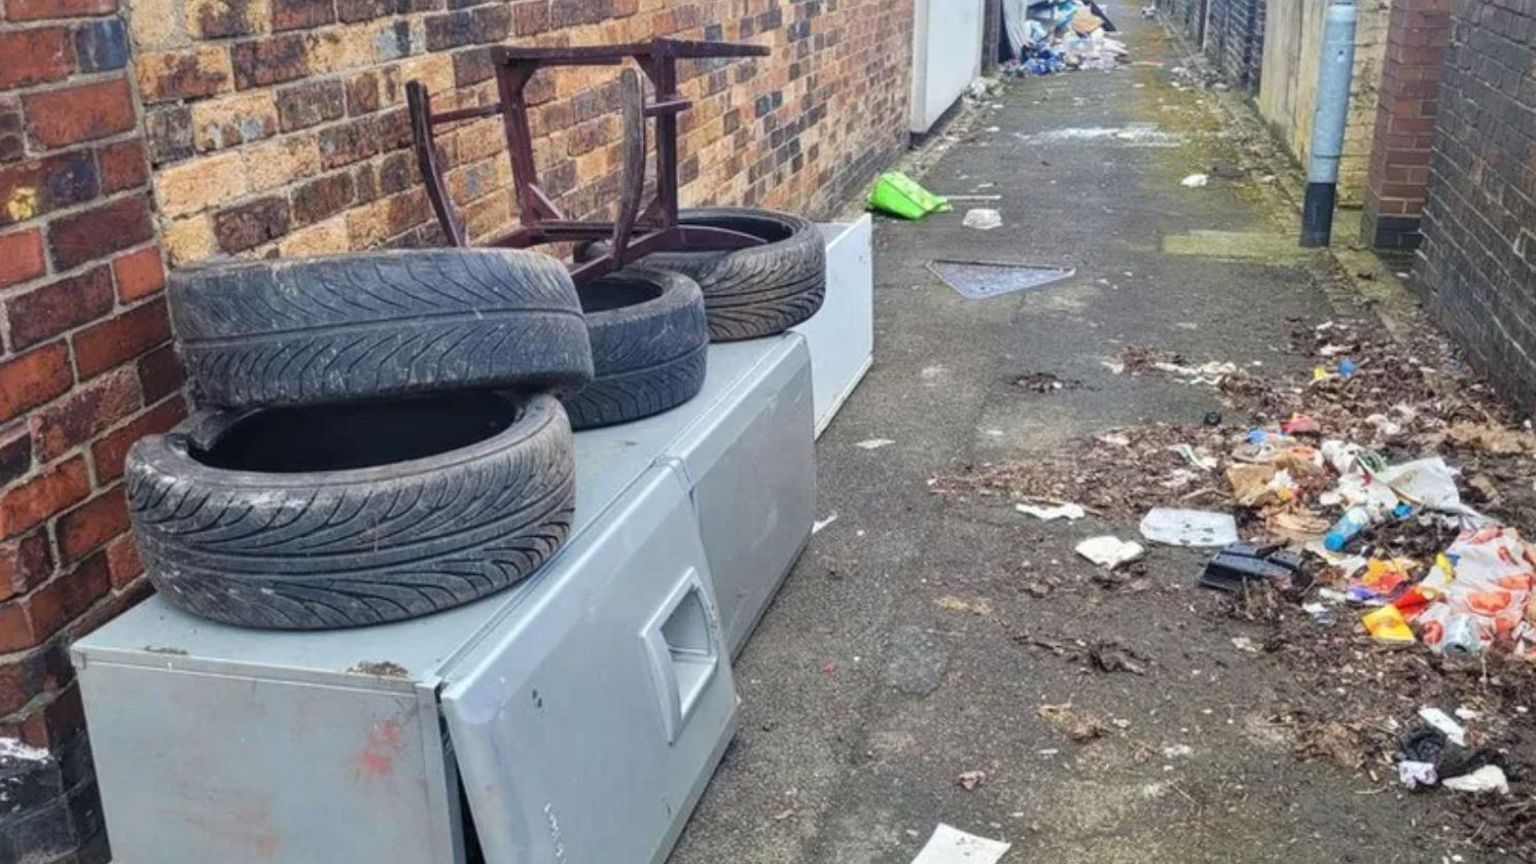 Dumped tyres and a fridge in an alley